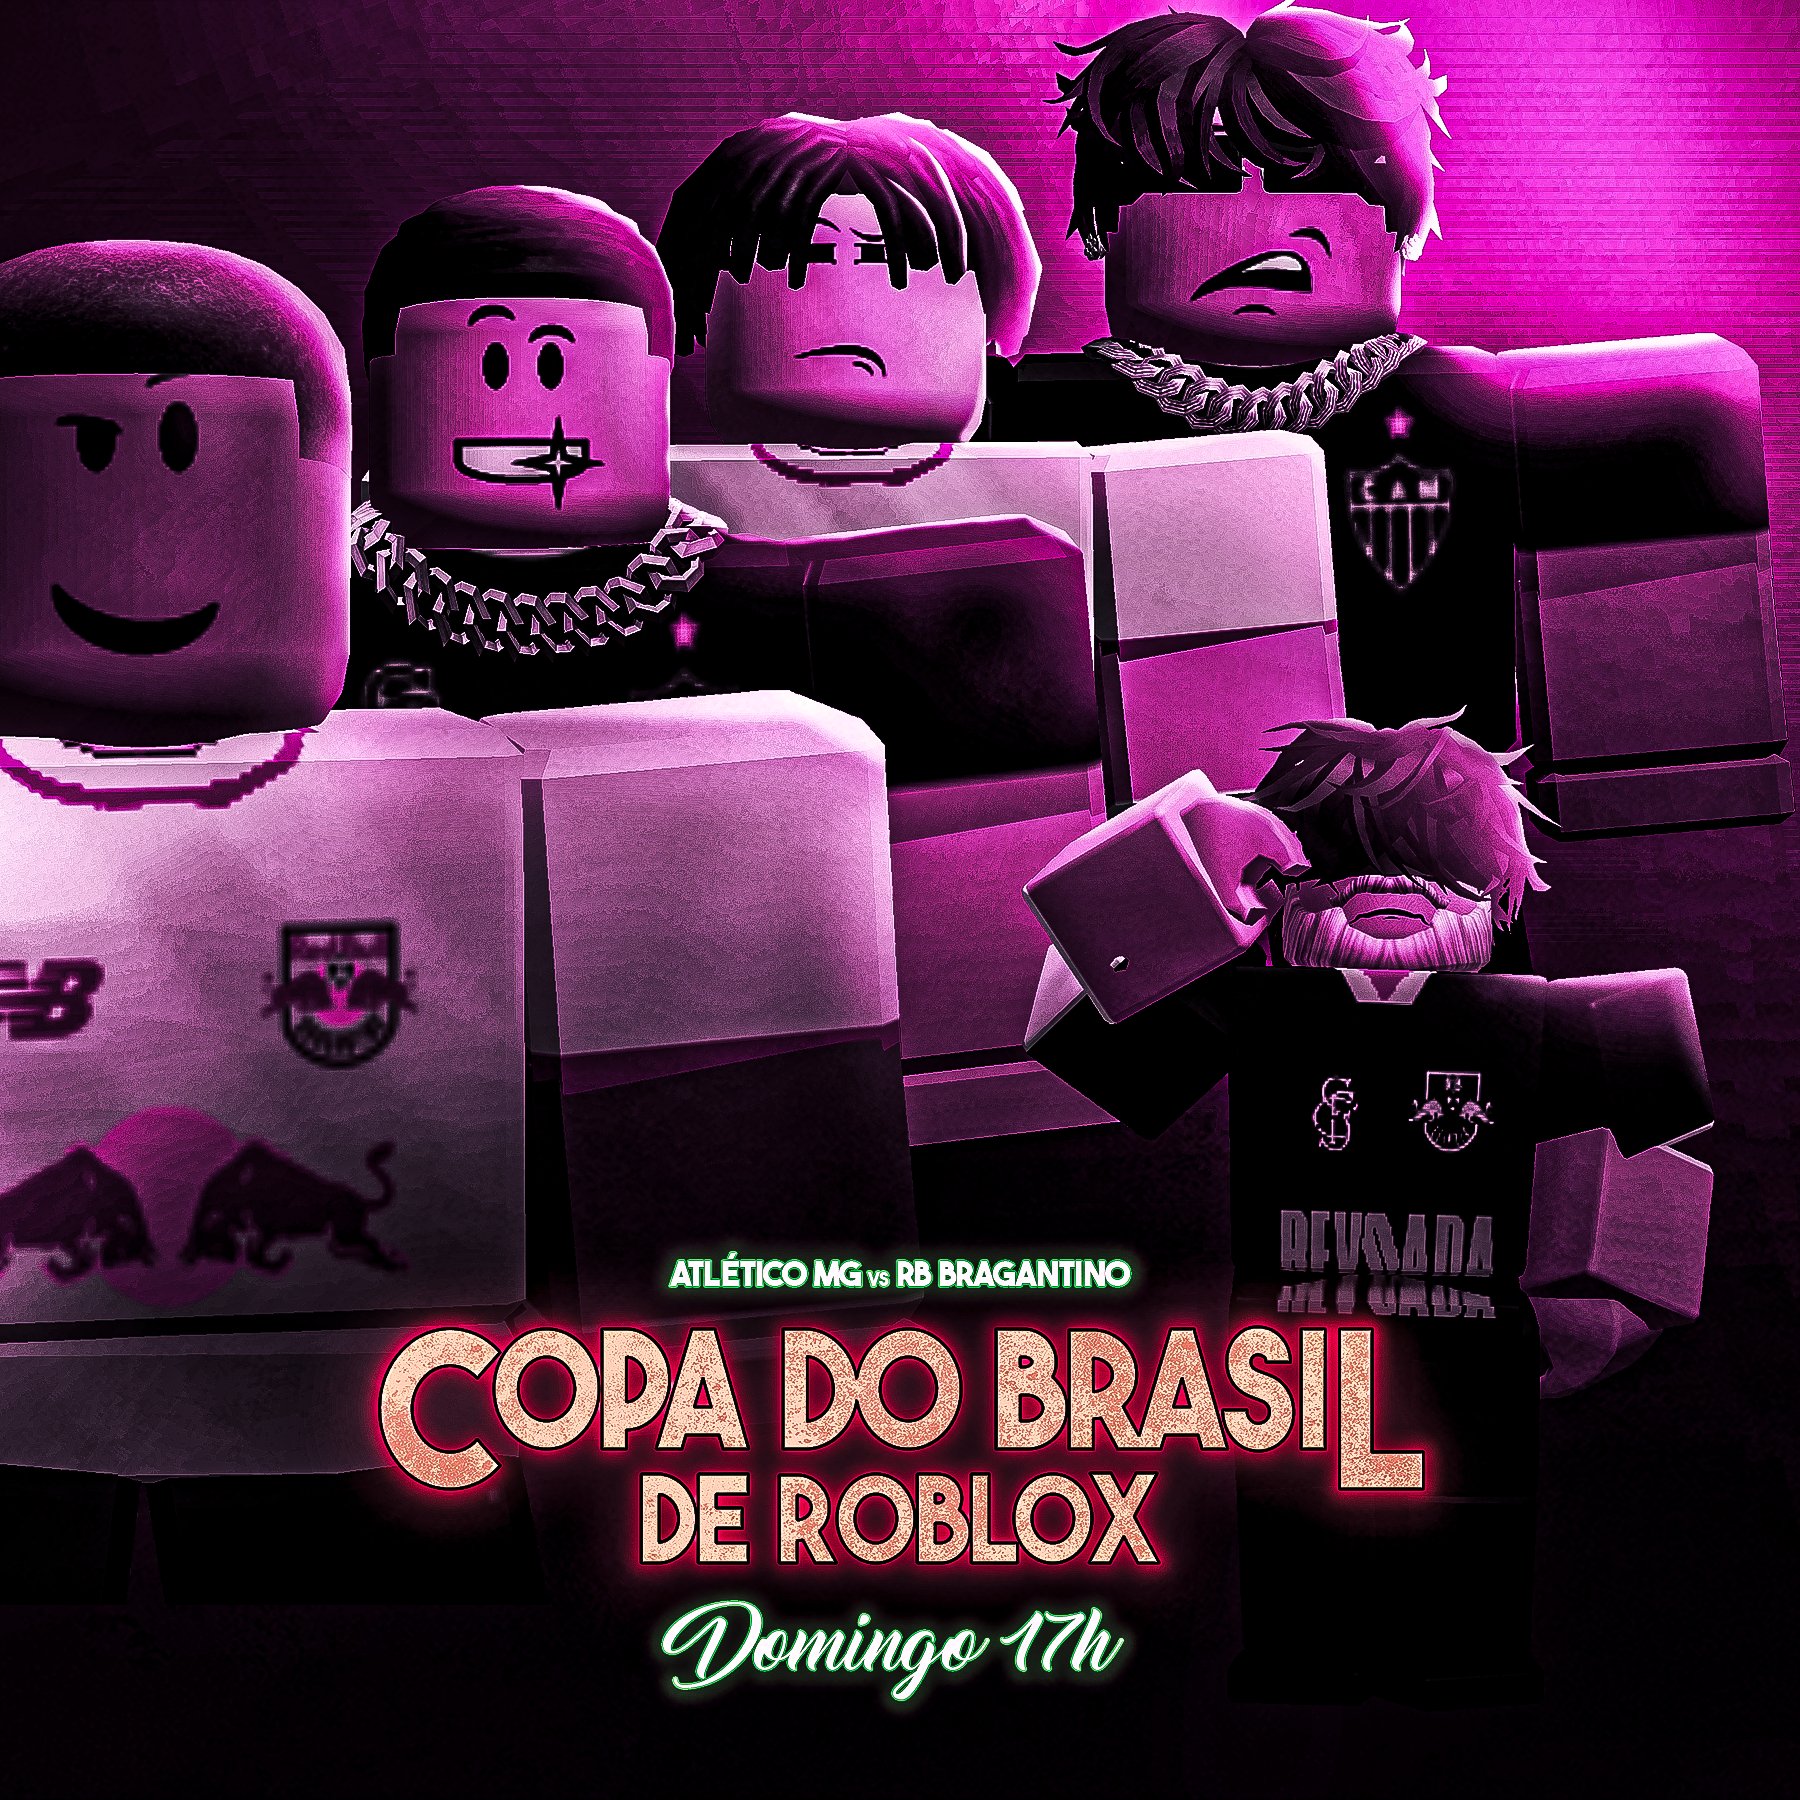 Copa Roblox 🏆 on X: Can you survive?  / X